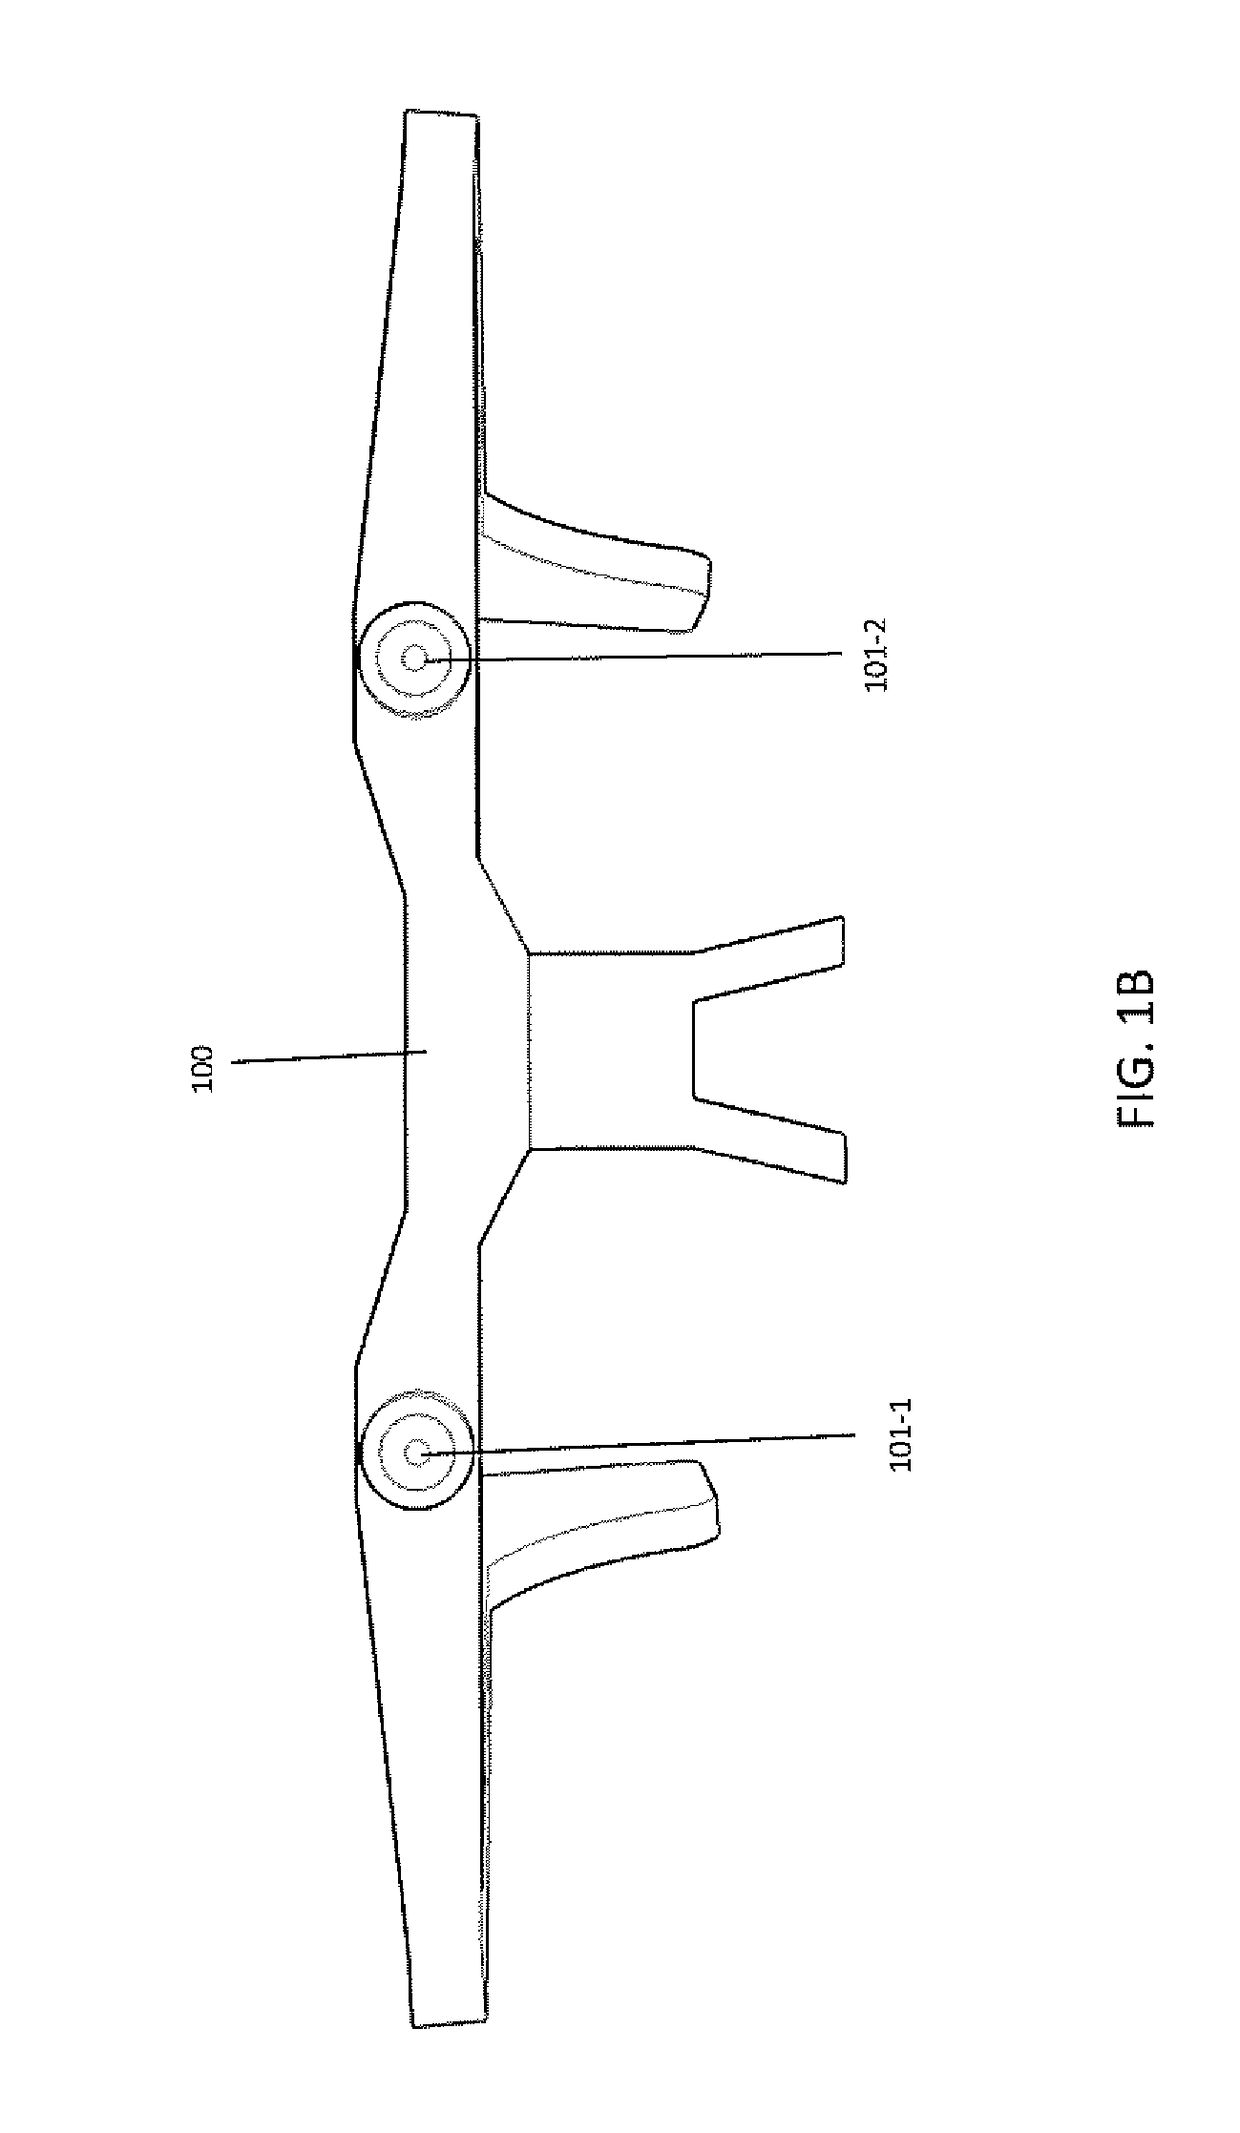 Wearable stereoscopic camera system for 3D virtual reality imaging and networked area learning